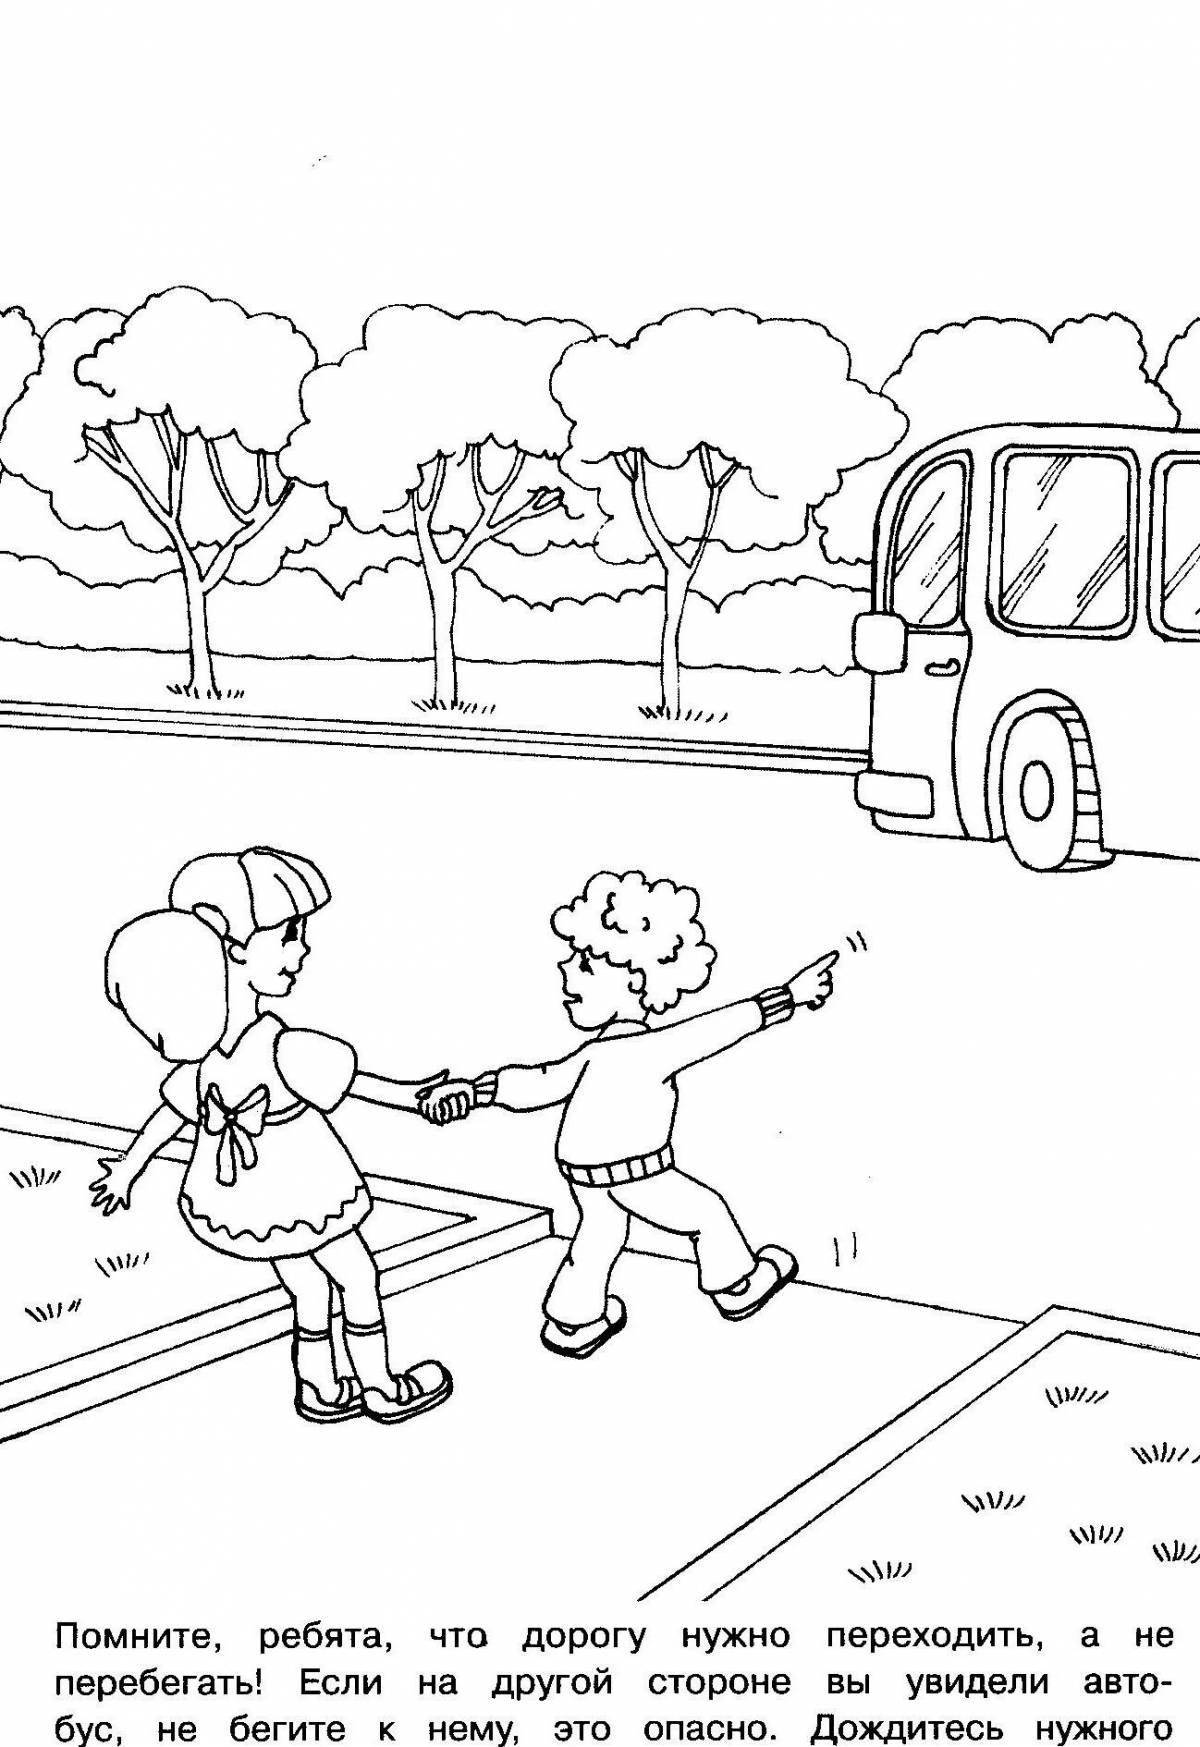 Creative traffic rules coloring page